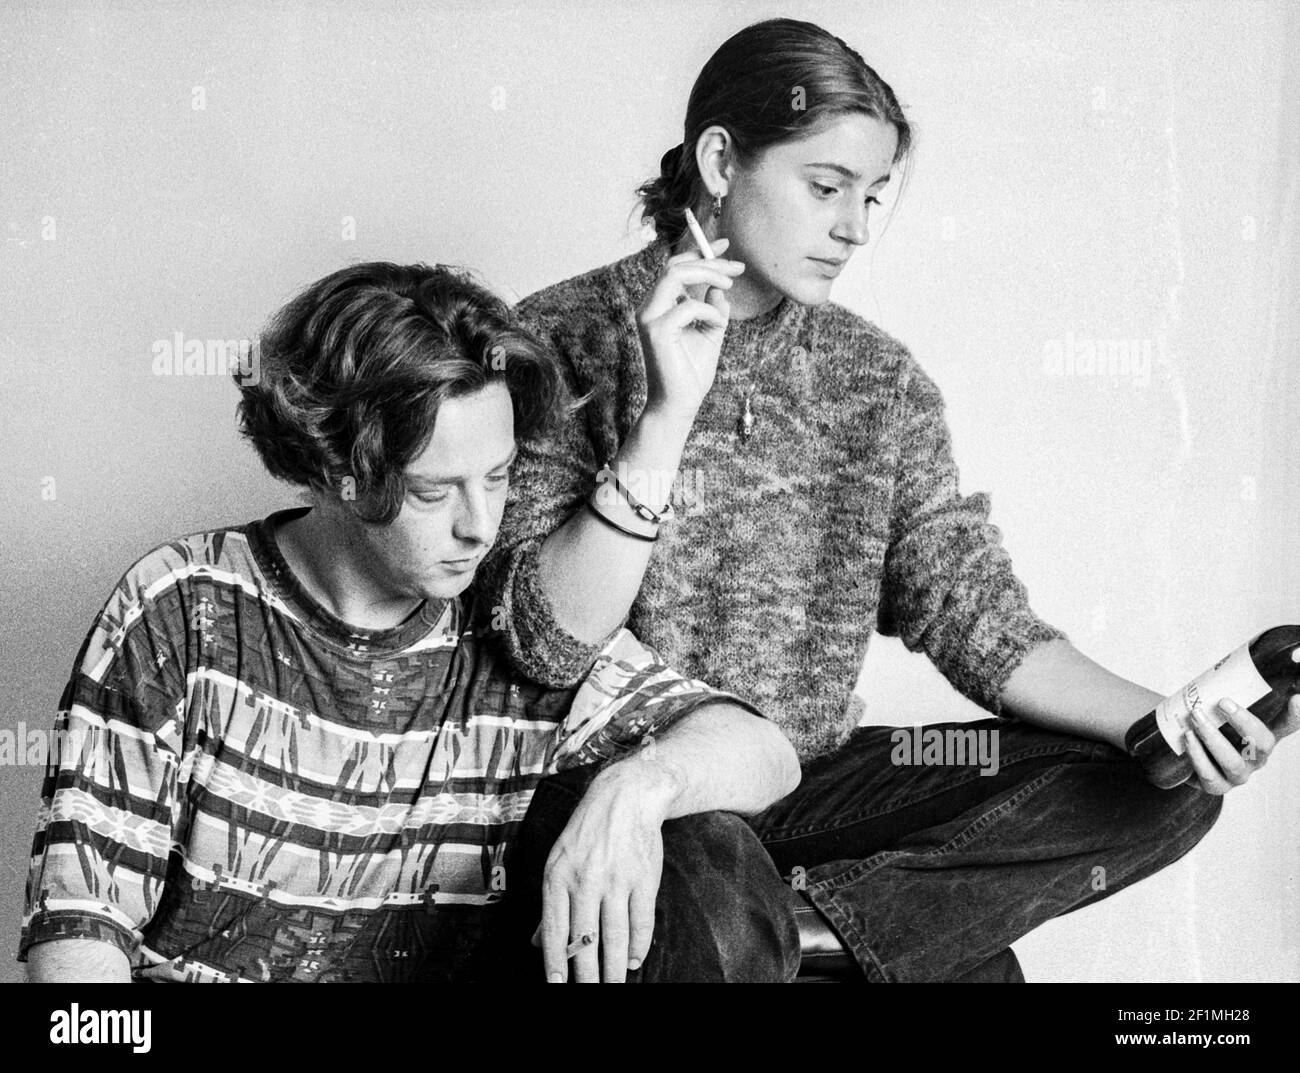 Tilburg, Netherlands. Young man and young woman pondering a bottle of red whine, Studioportrait on Analog Black & White Film, 1995. Stock Photo